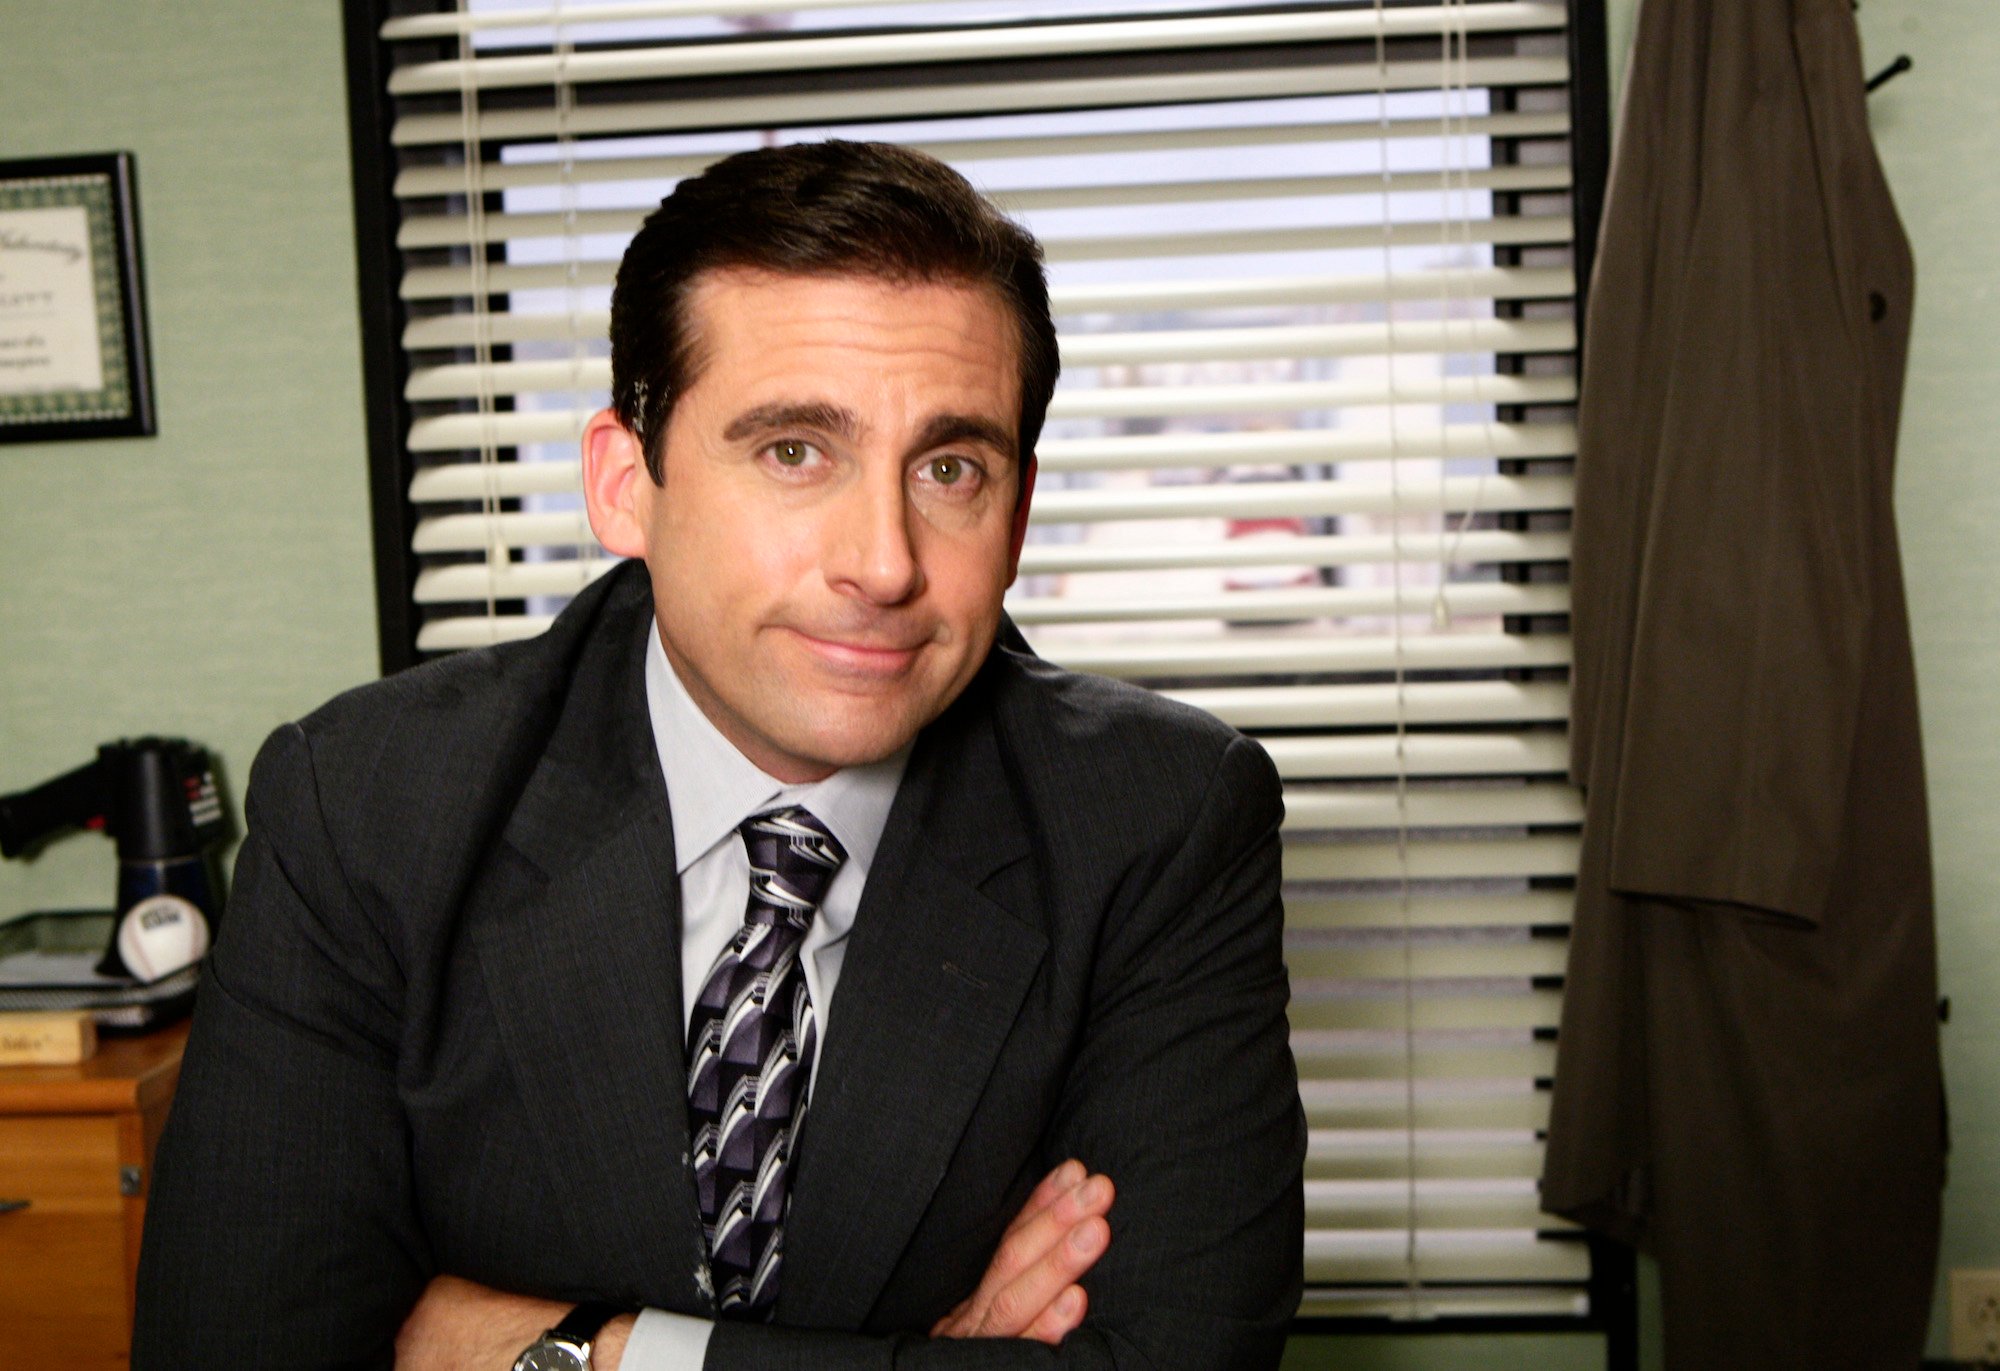 Steve Carell sits in front of a window as his character Michael Scott on The Office.